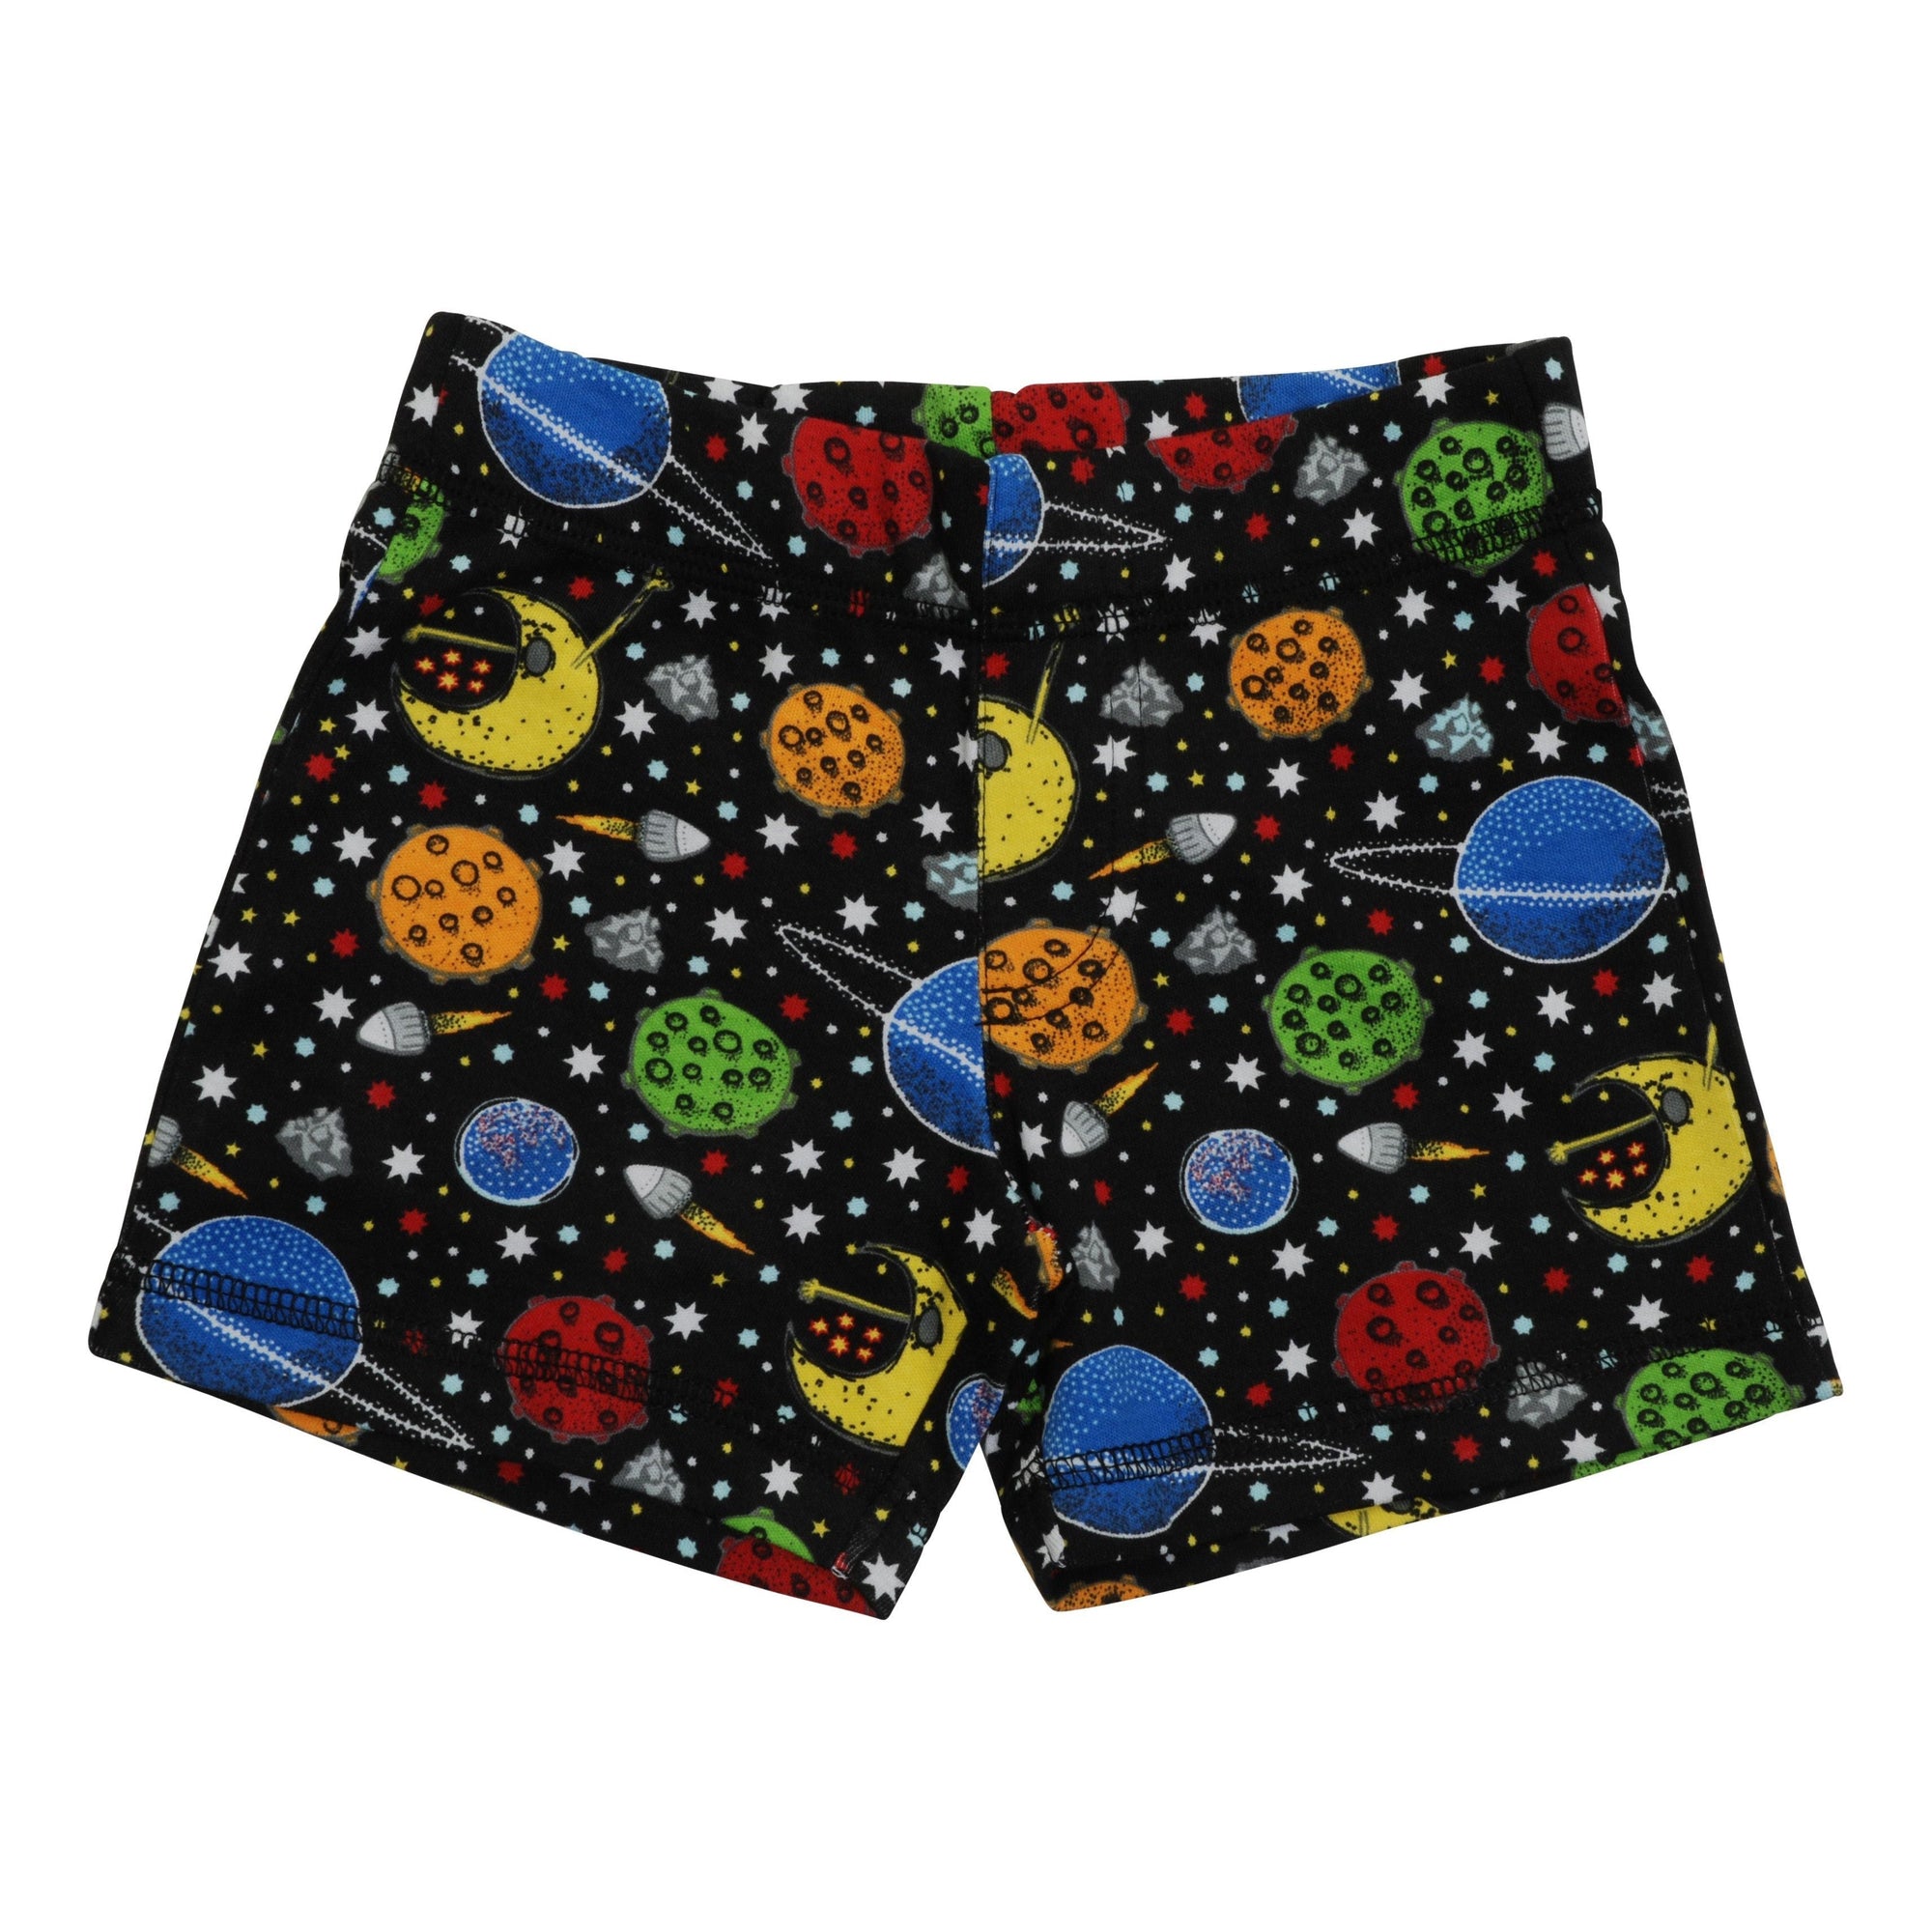 Space Shorts - 2 Left Size 10-12 & 12-14 years-Duns Sweden-Modern Rascals